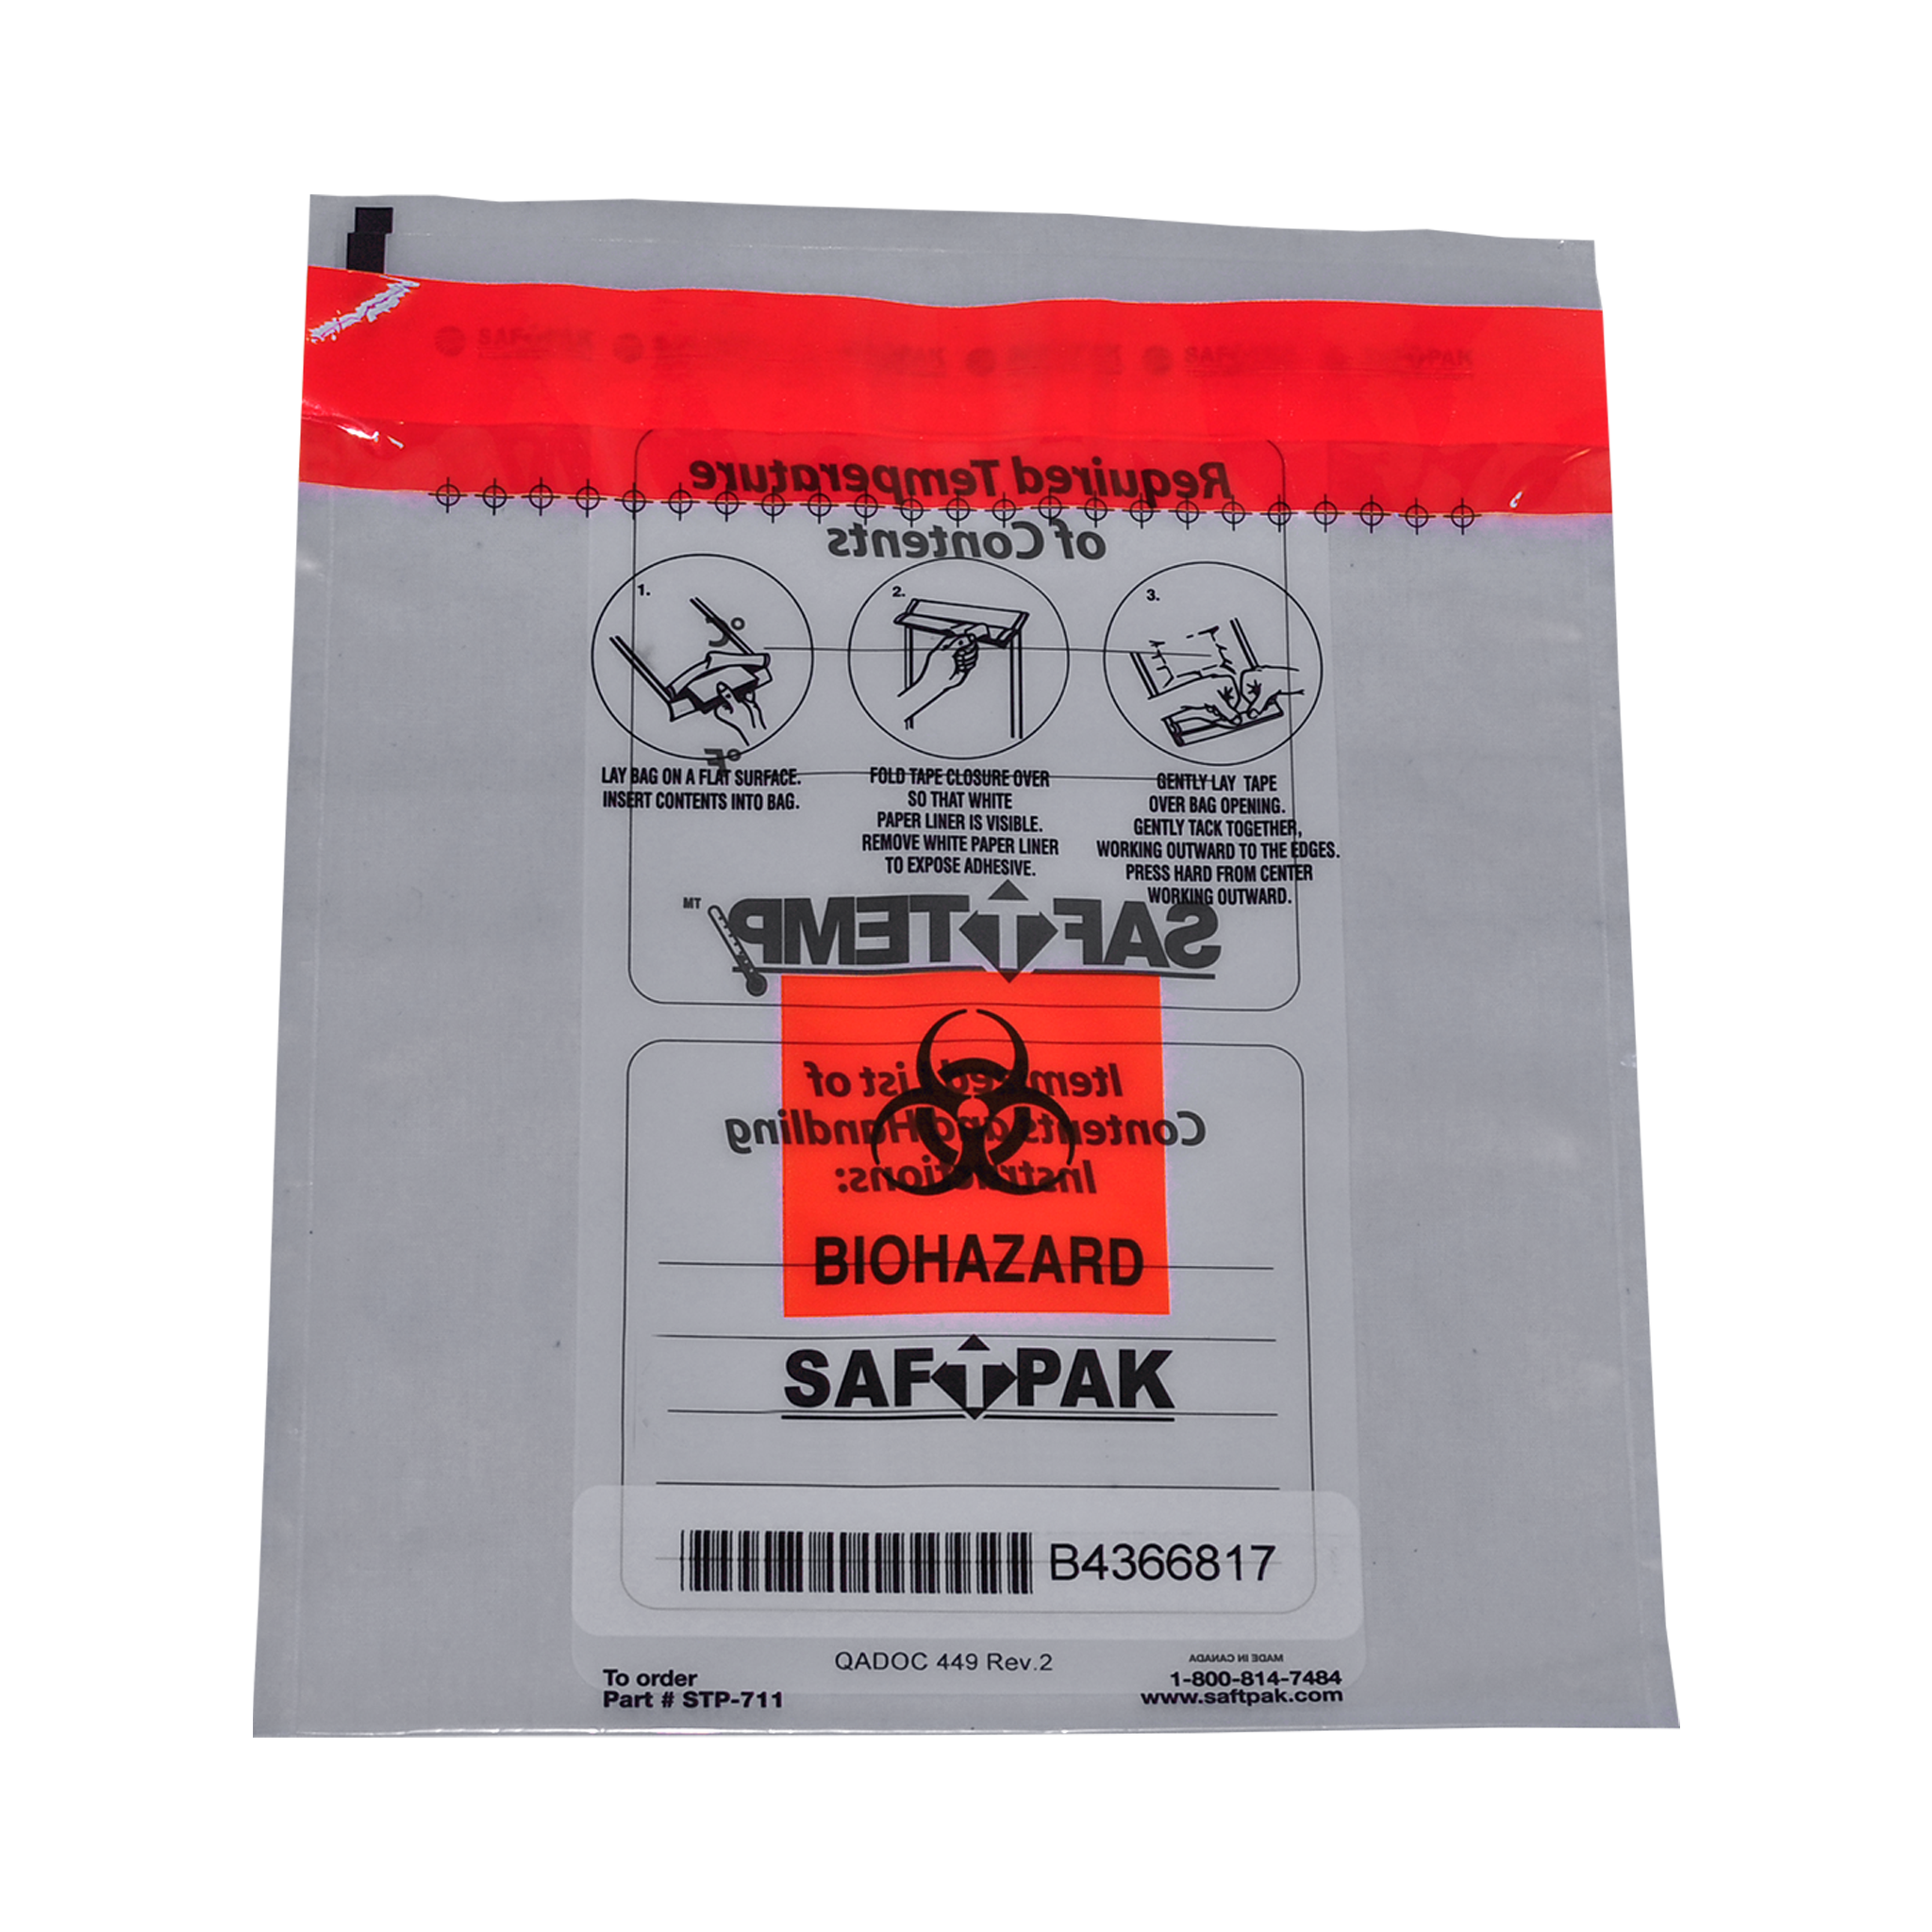 KNF FLEXPAK Clear Polyethylene Cleanroom Bags:Facility Safety and